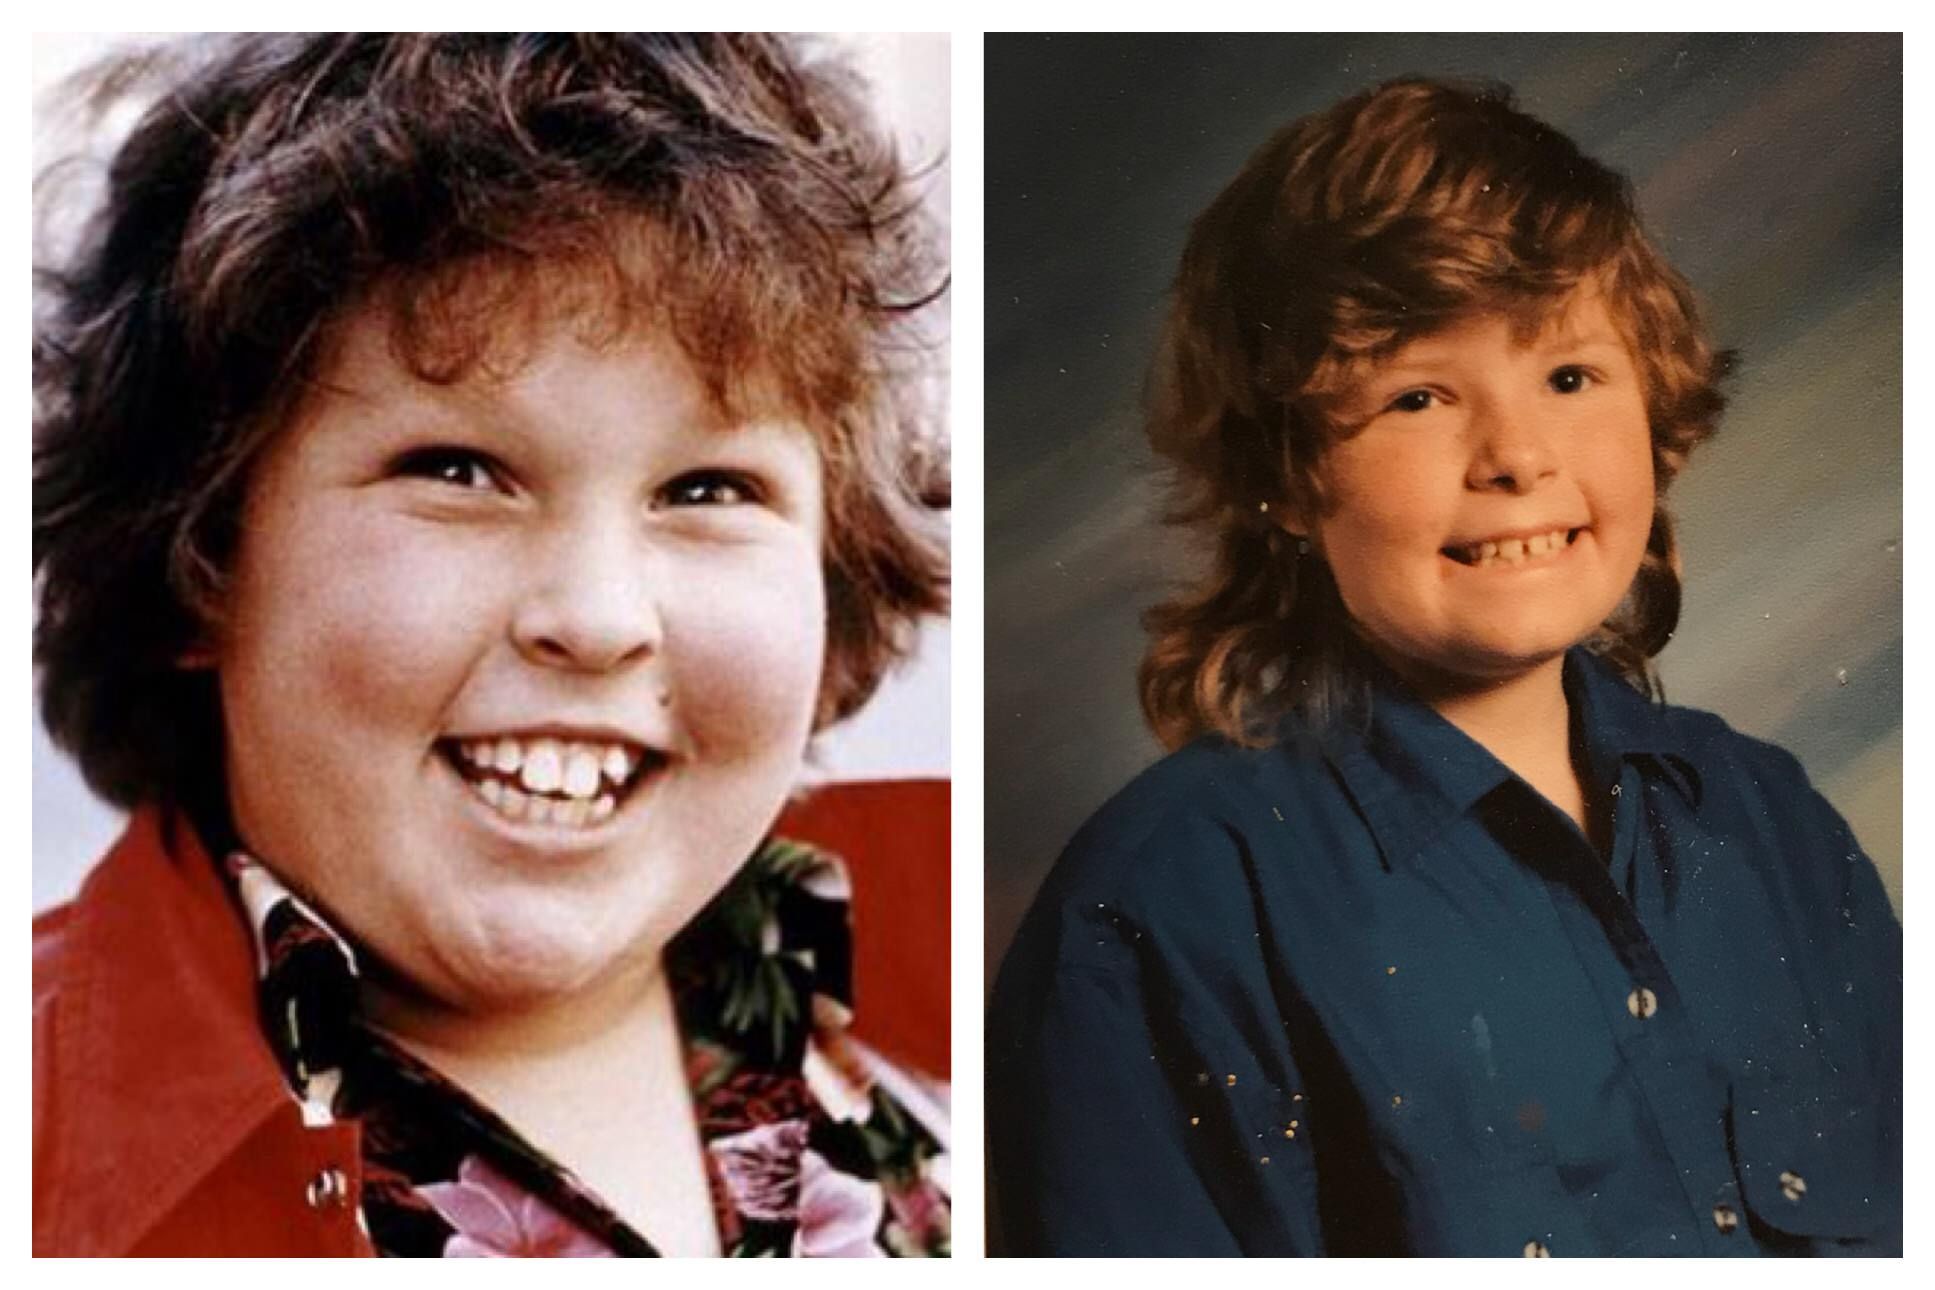 I was the female version of chunk in fourth grade